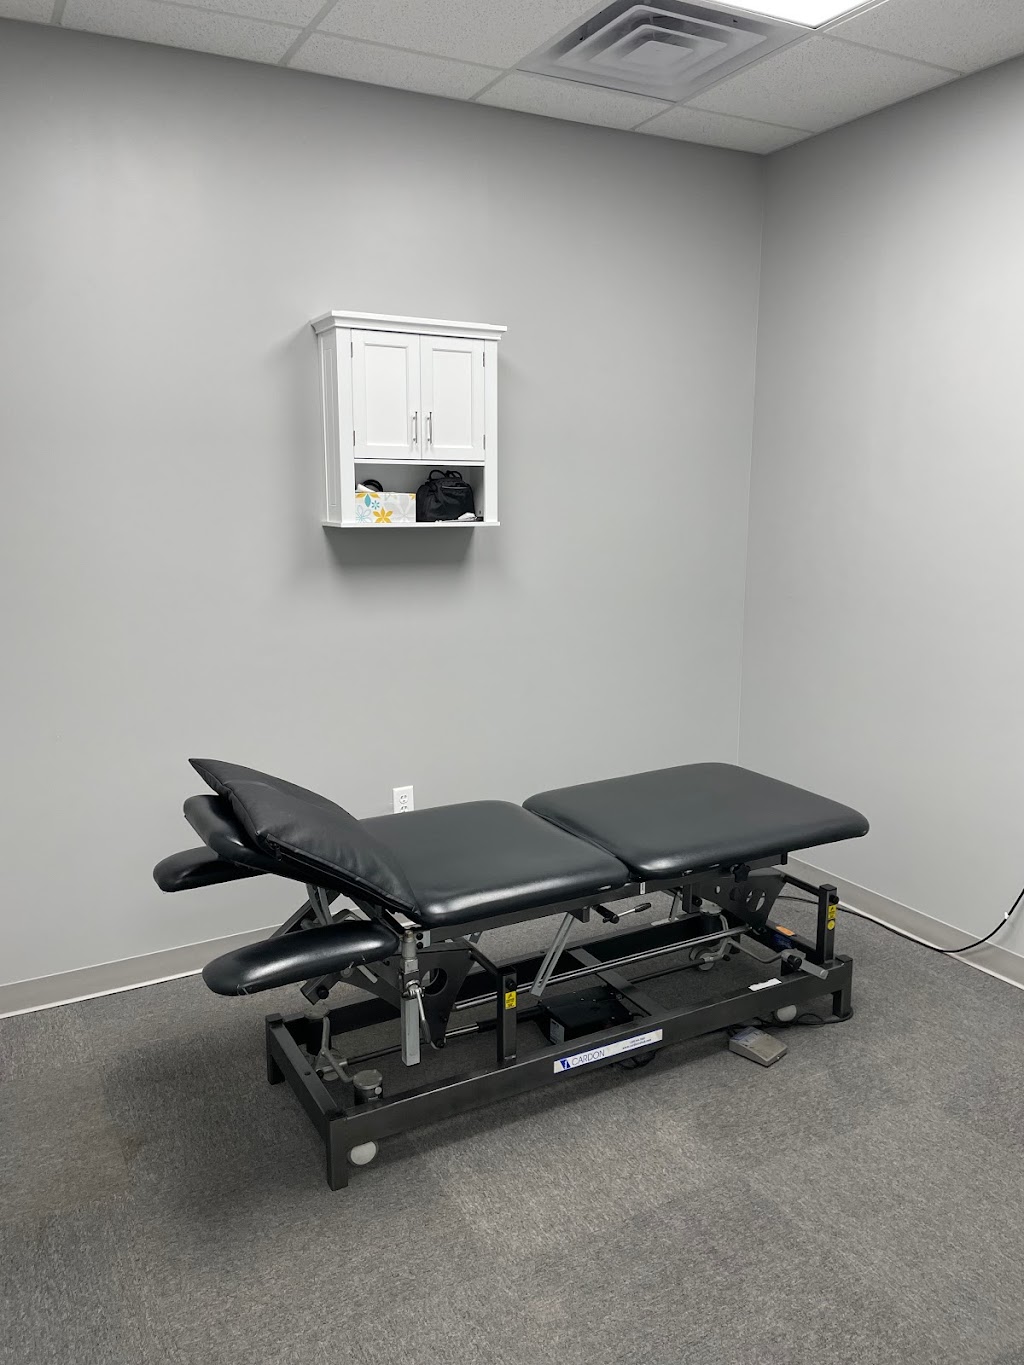 Elite Integrated Therapy Centers | 2021 Bridgemill Dr Suite 106, Fort Mill, SC 29707, USA | Phone: (803) 298-8995